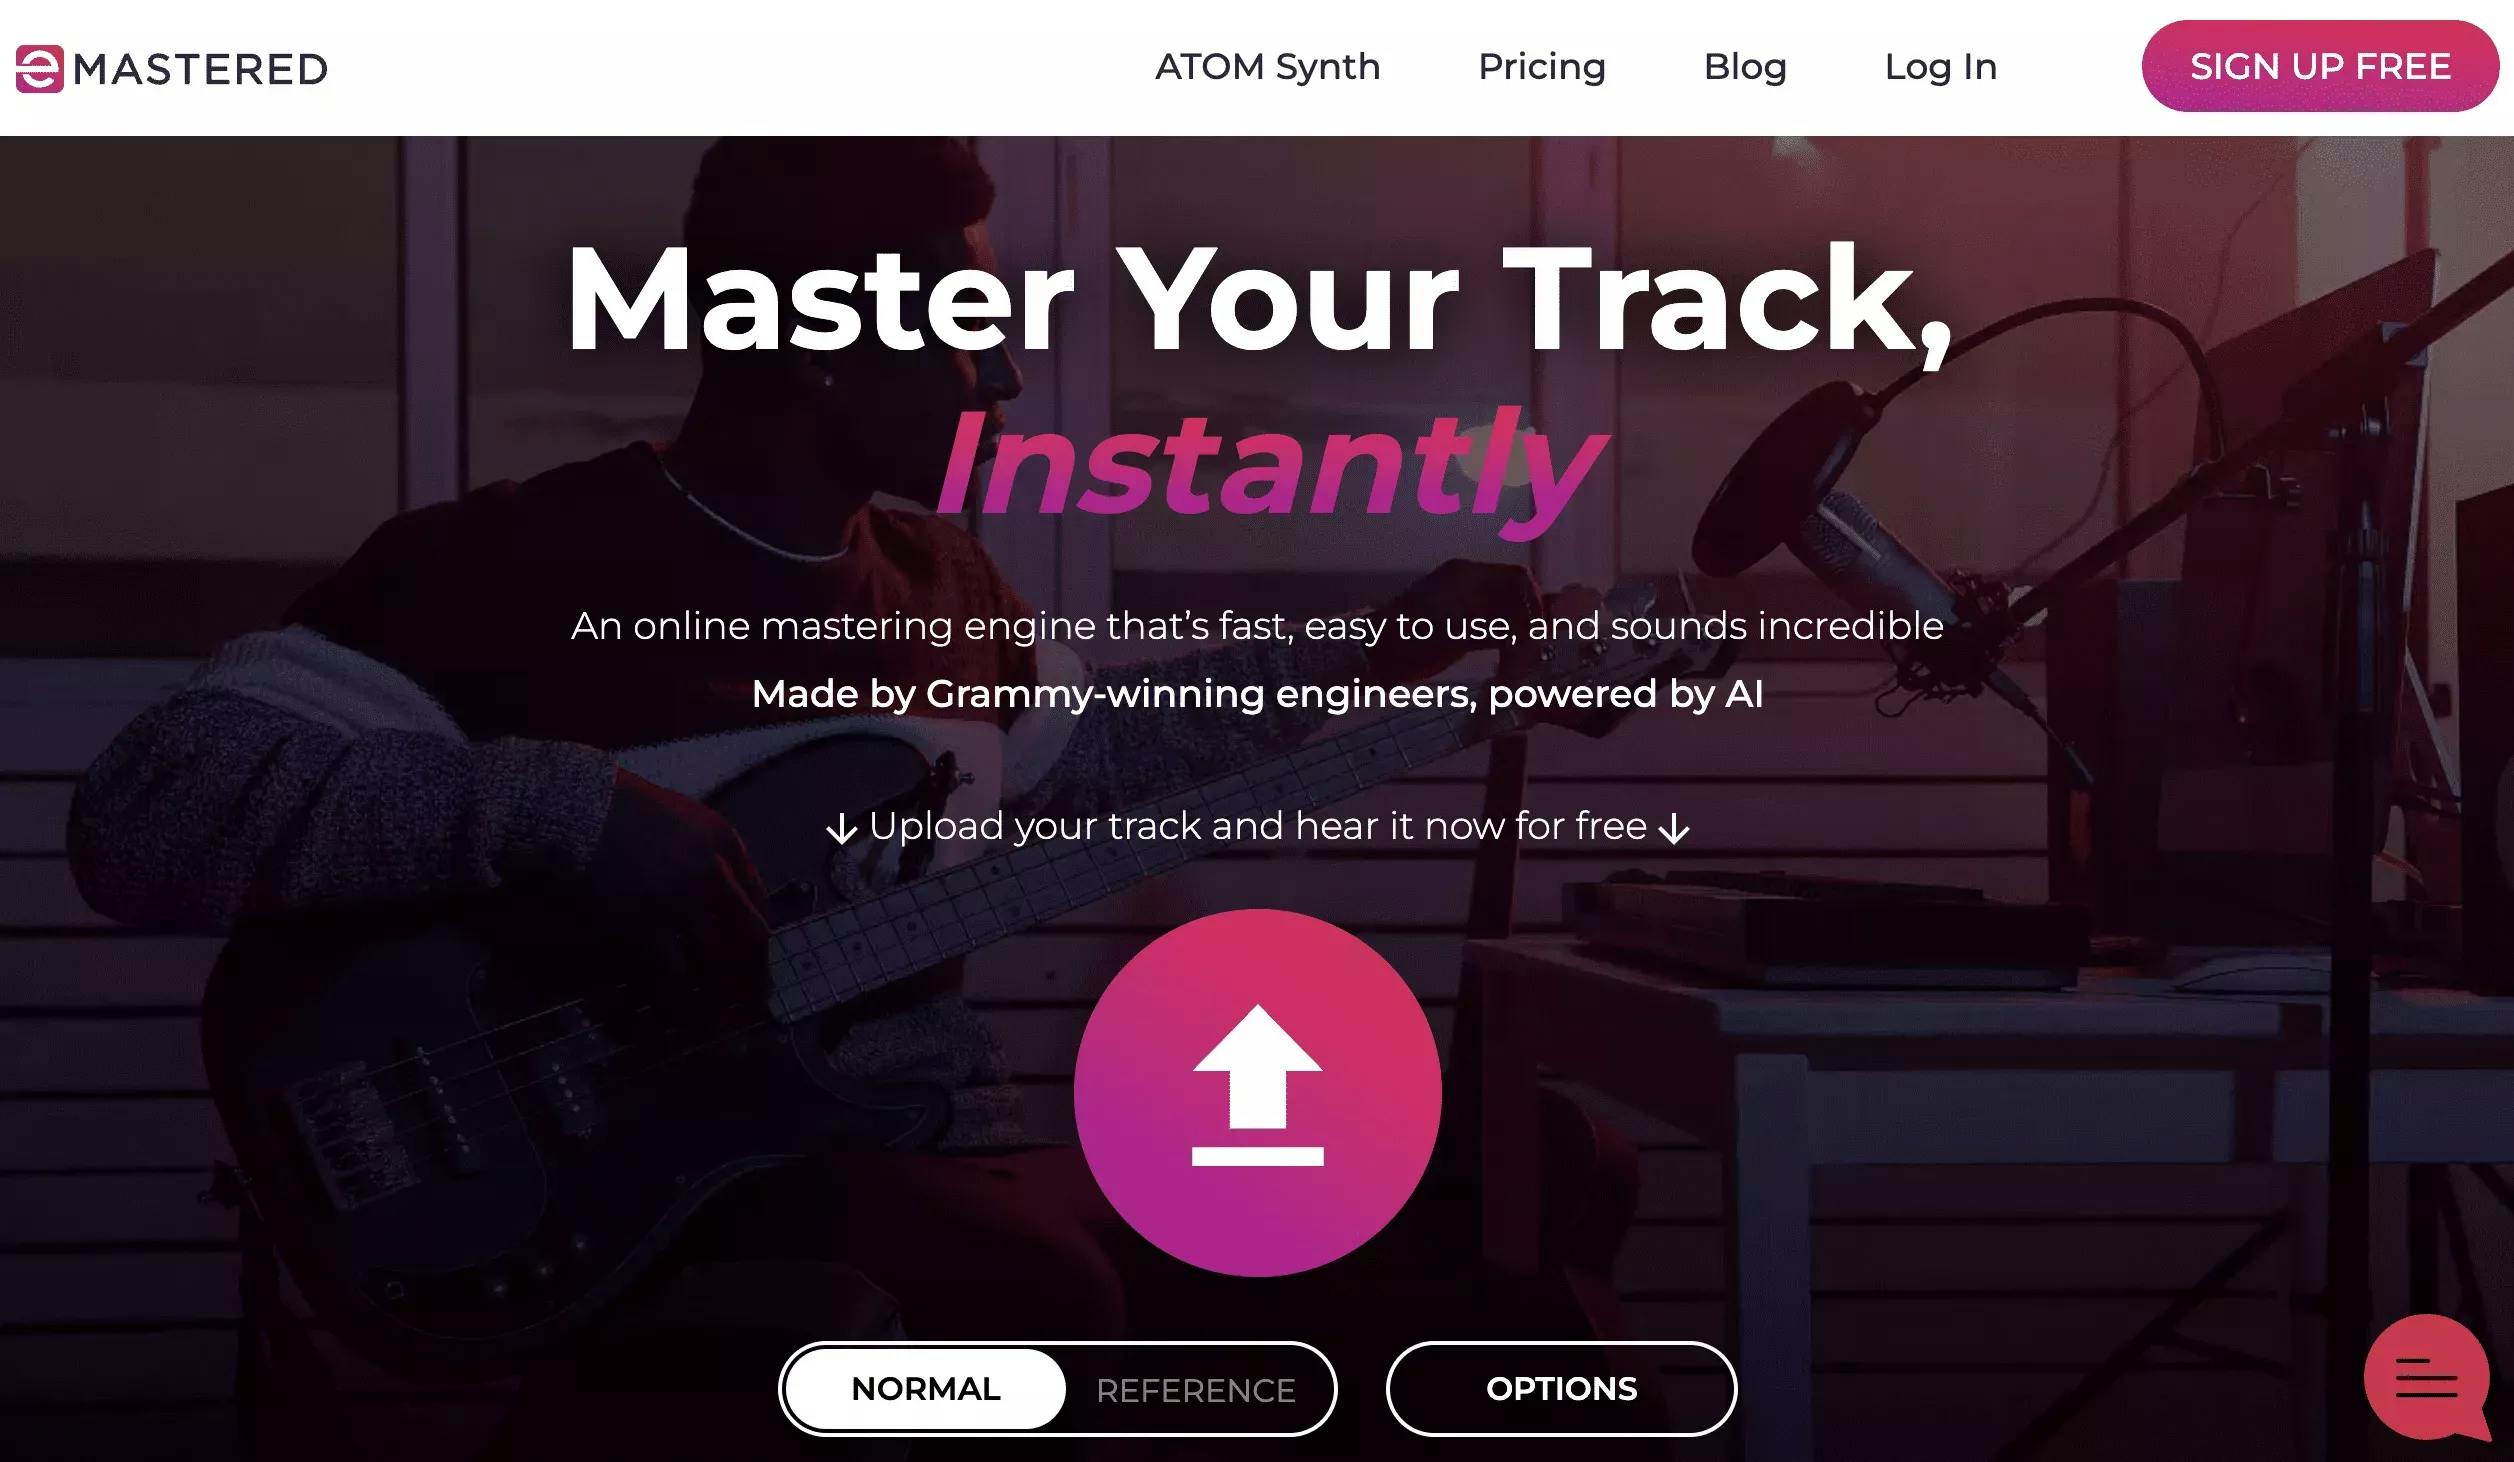 Homepage of eMastered with big text in white and pink that says "Master Your Track, Instantly"